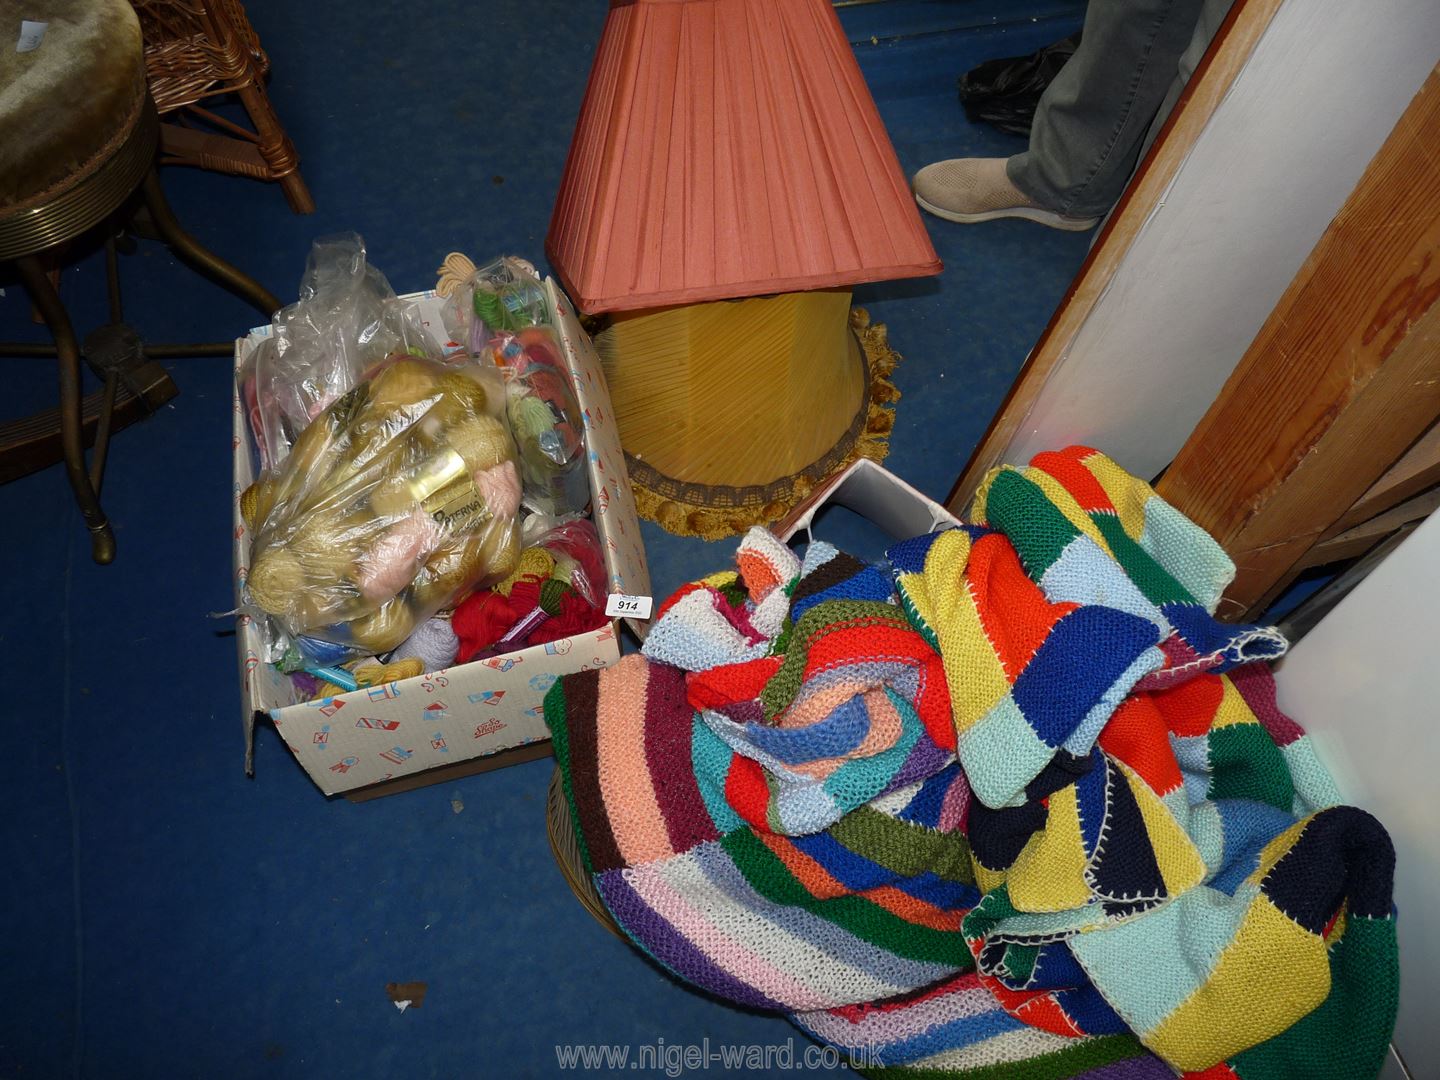 A quantity of lamp shades, knitting wool and two knitted patchwork throws.